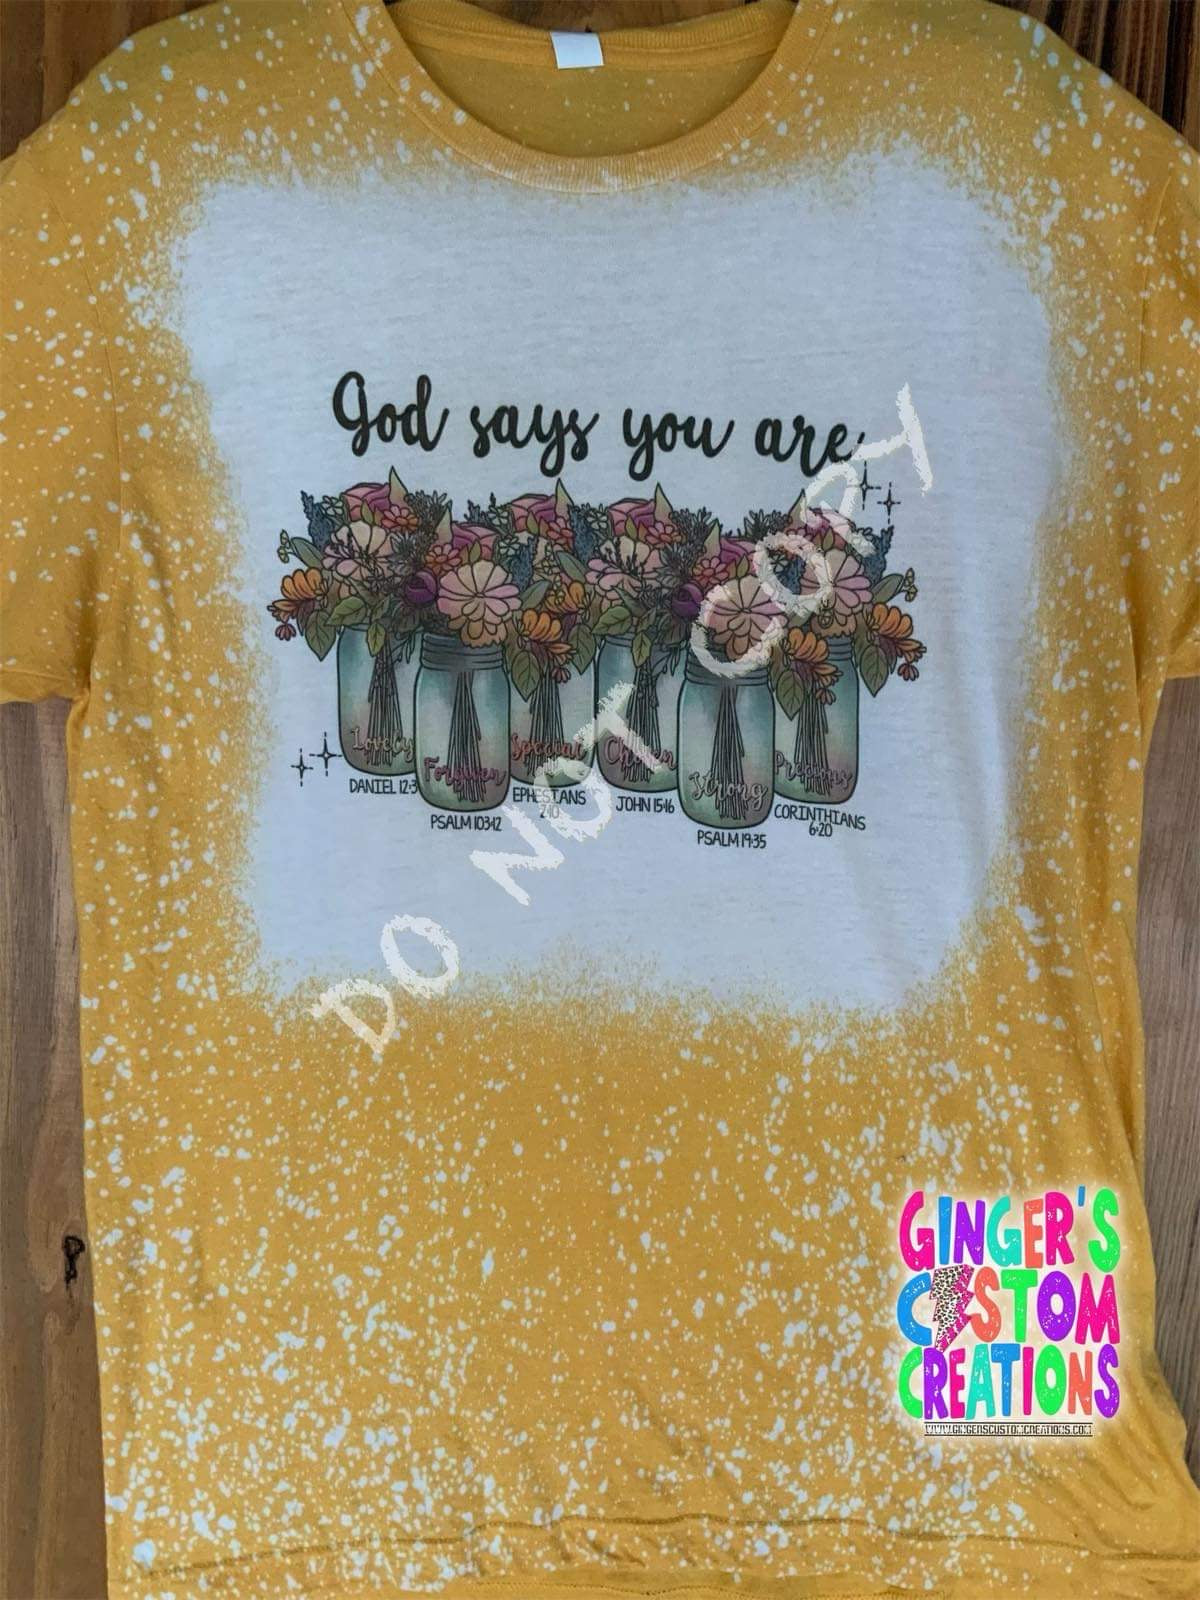 GOD SAYS YOU ARE  - BLEACHED SHIRT